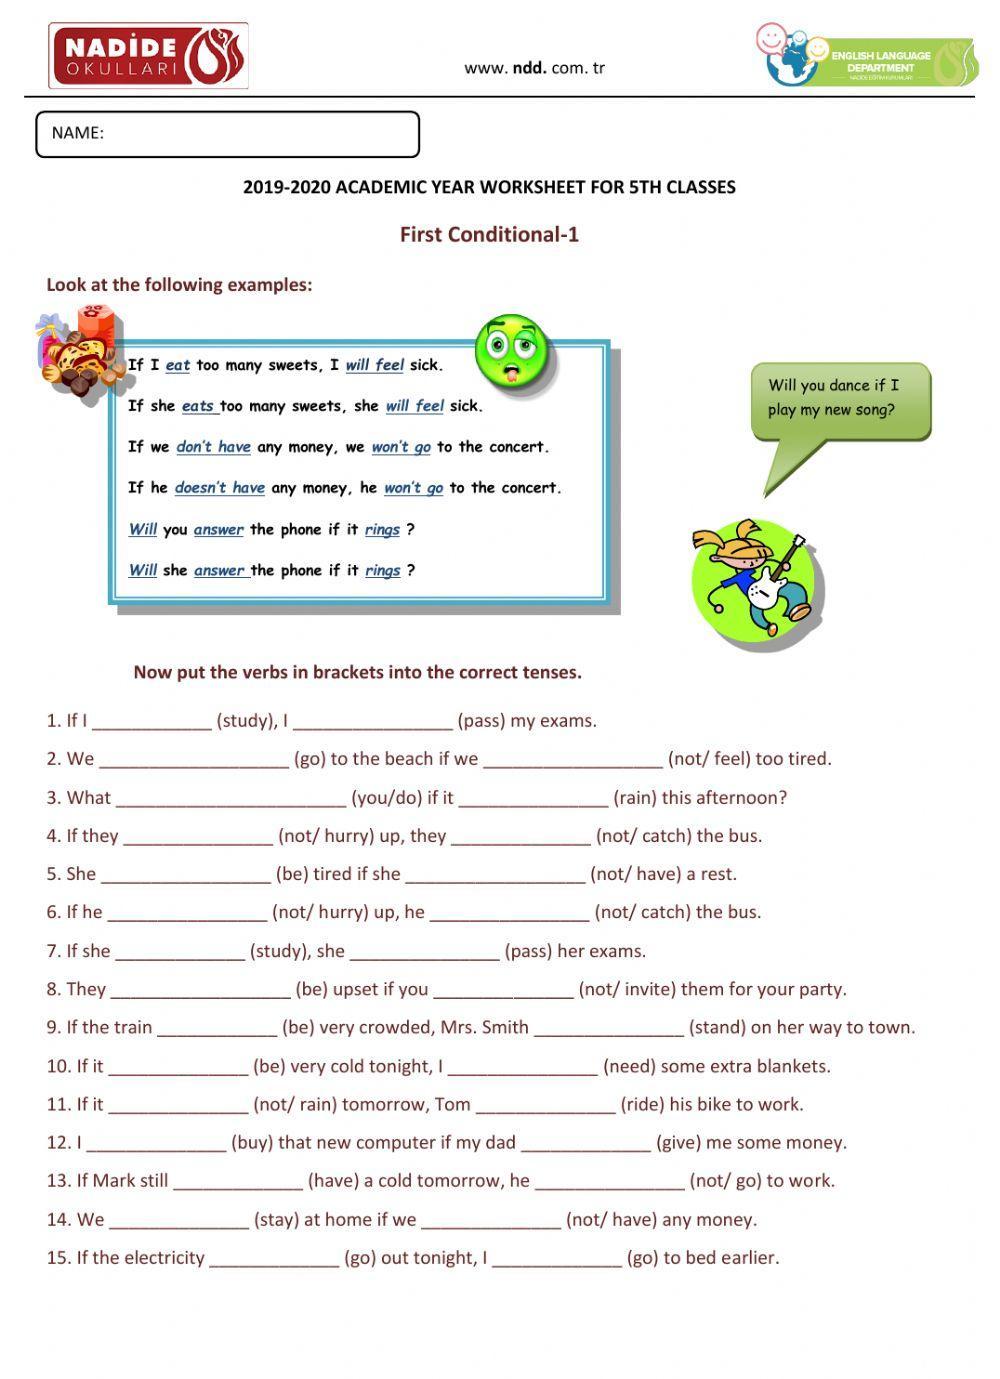 5th Grades IF CLAUSES TYPE-1 Worksheet-1